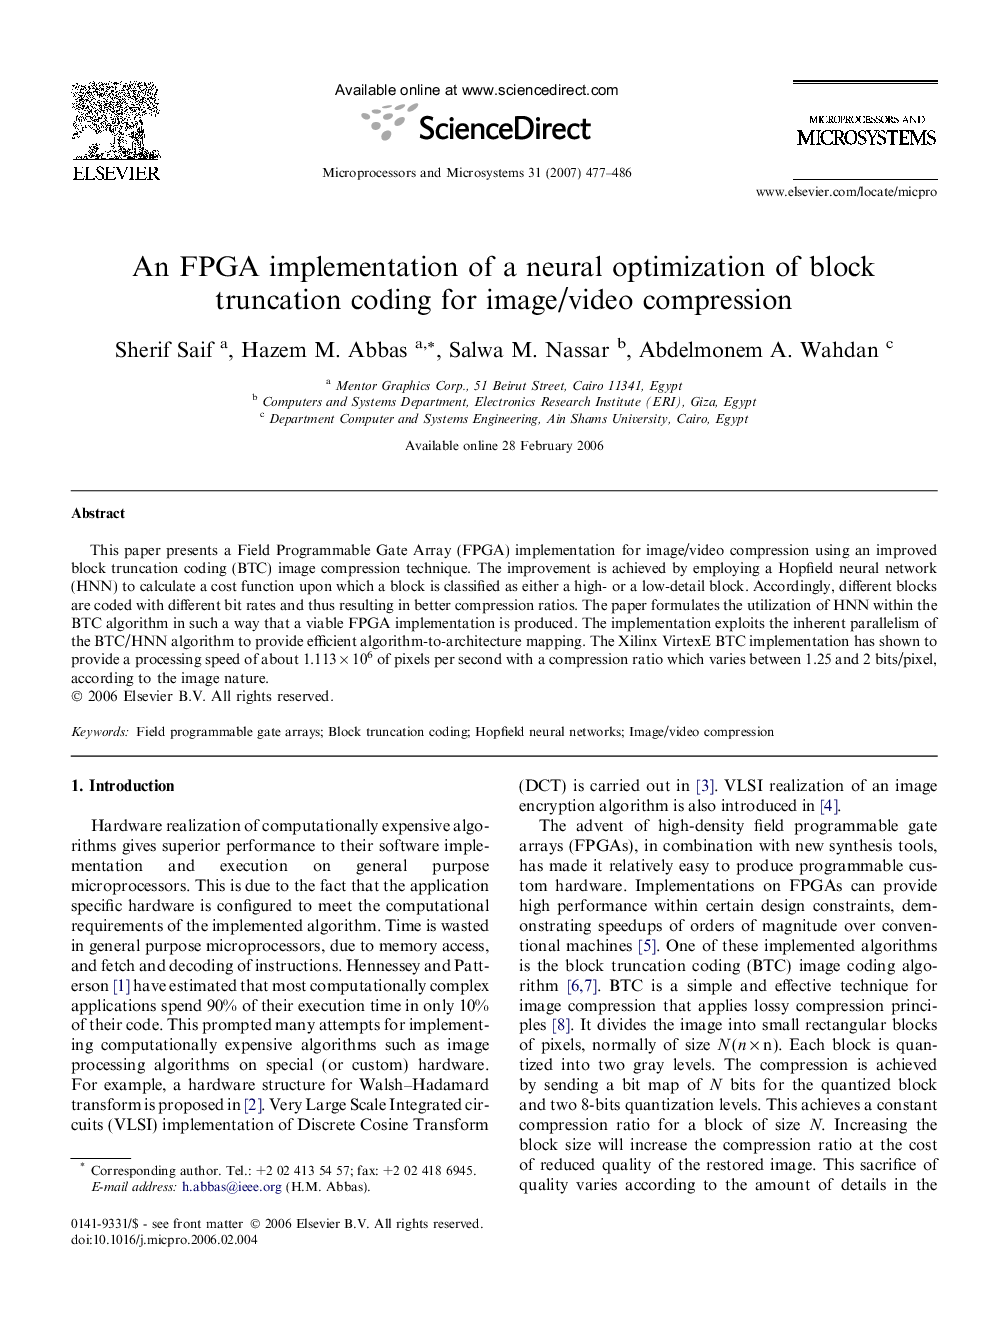 An FPGA implementation of a neural optimization of block truncation coding for image/video compression